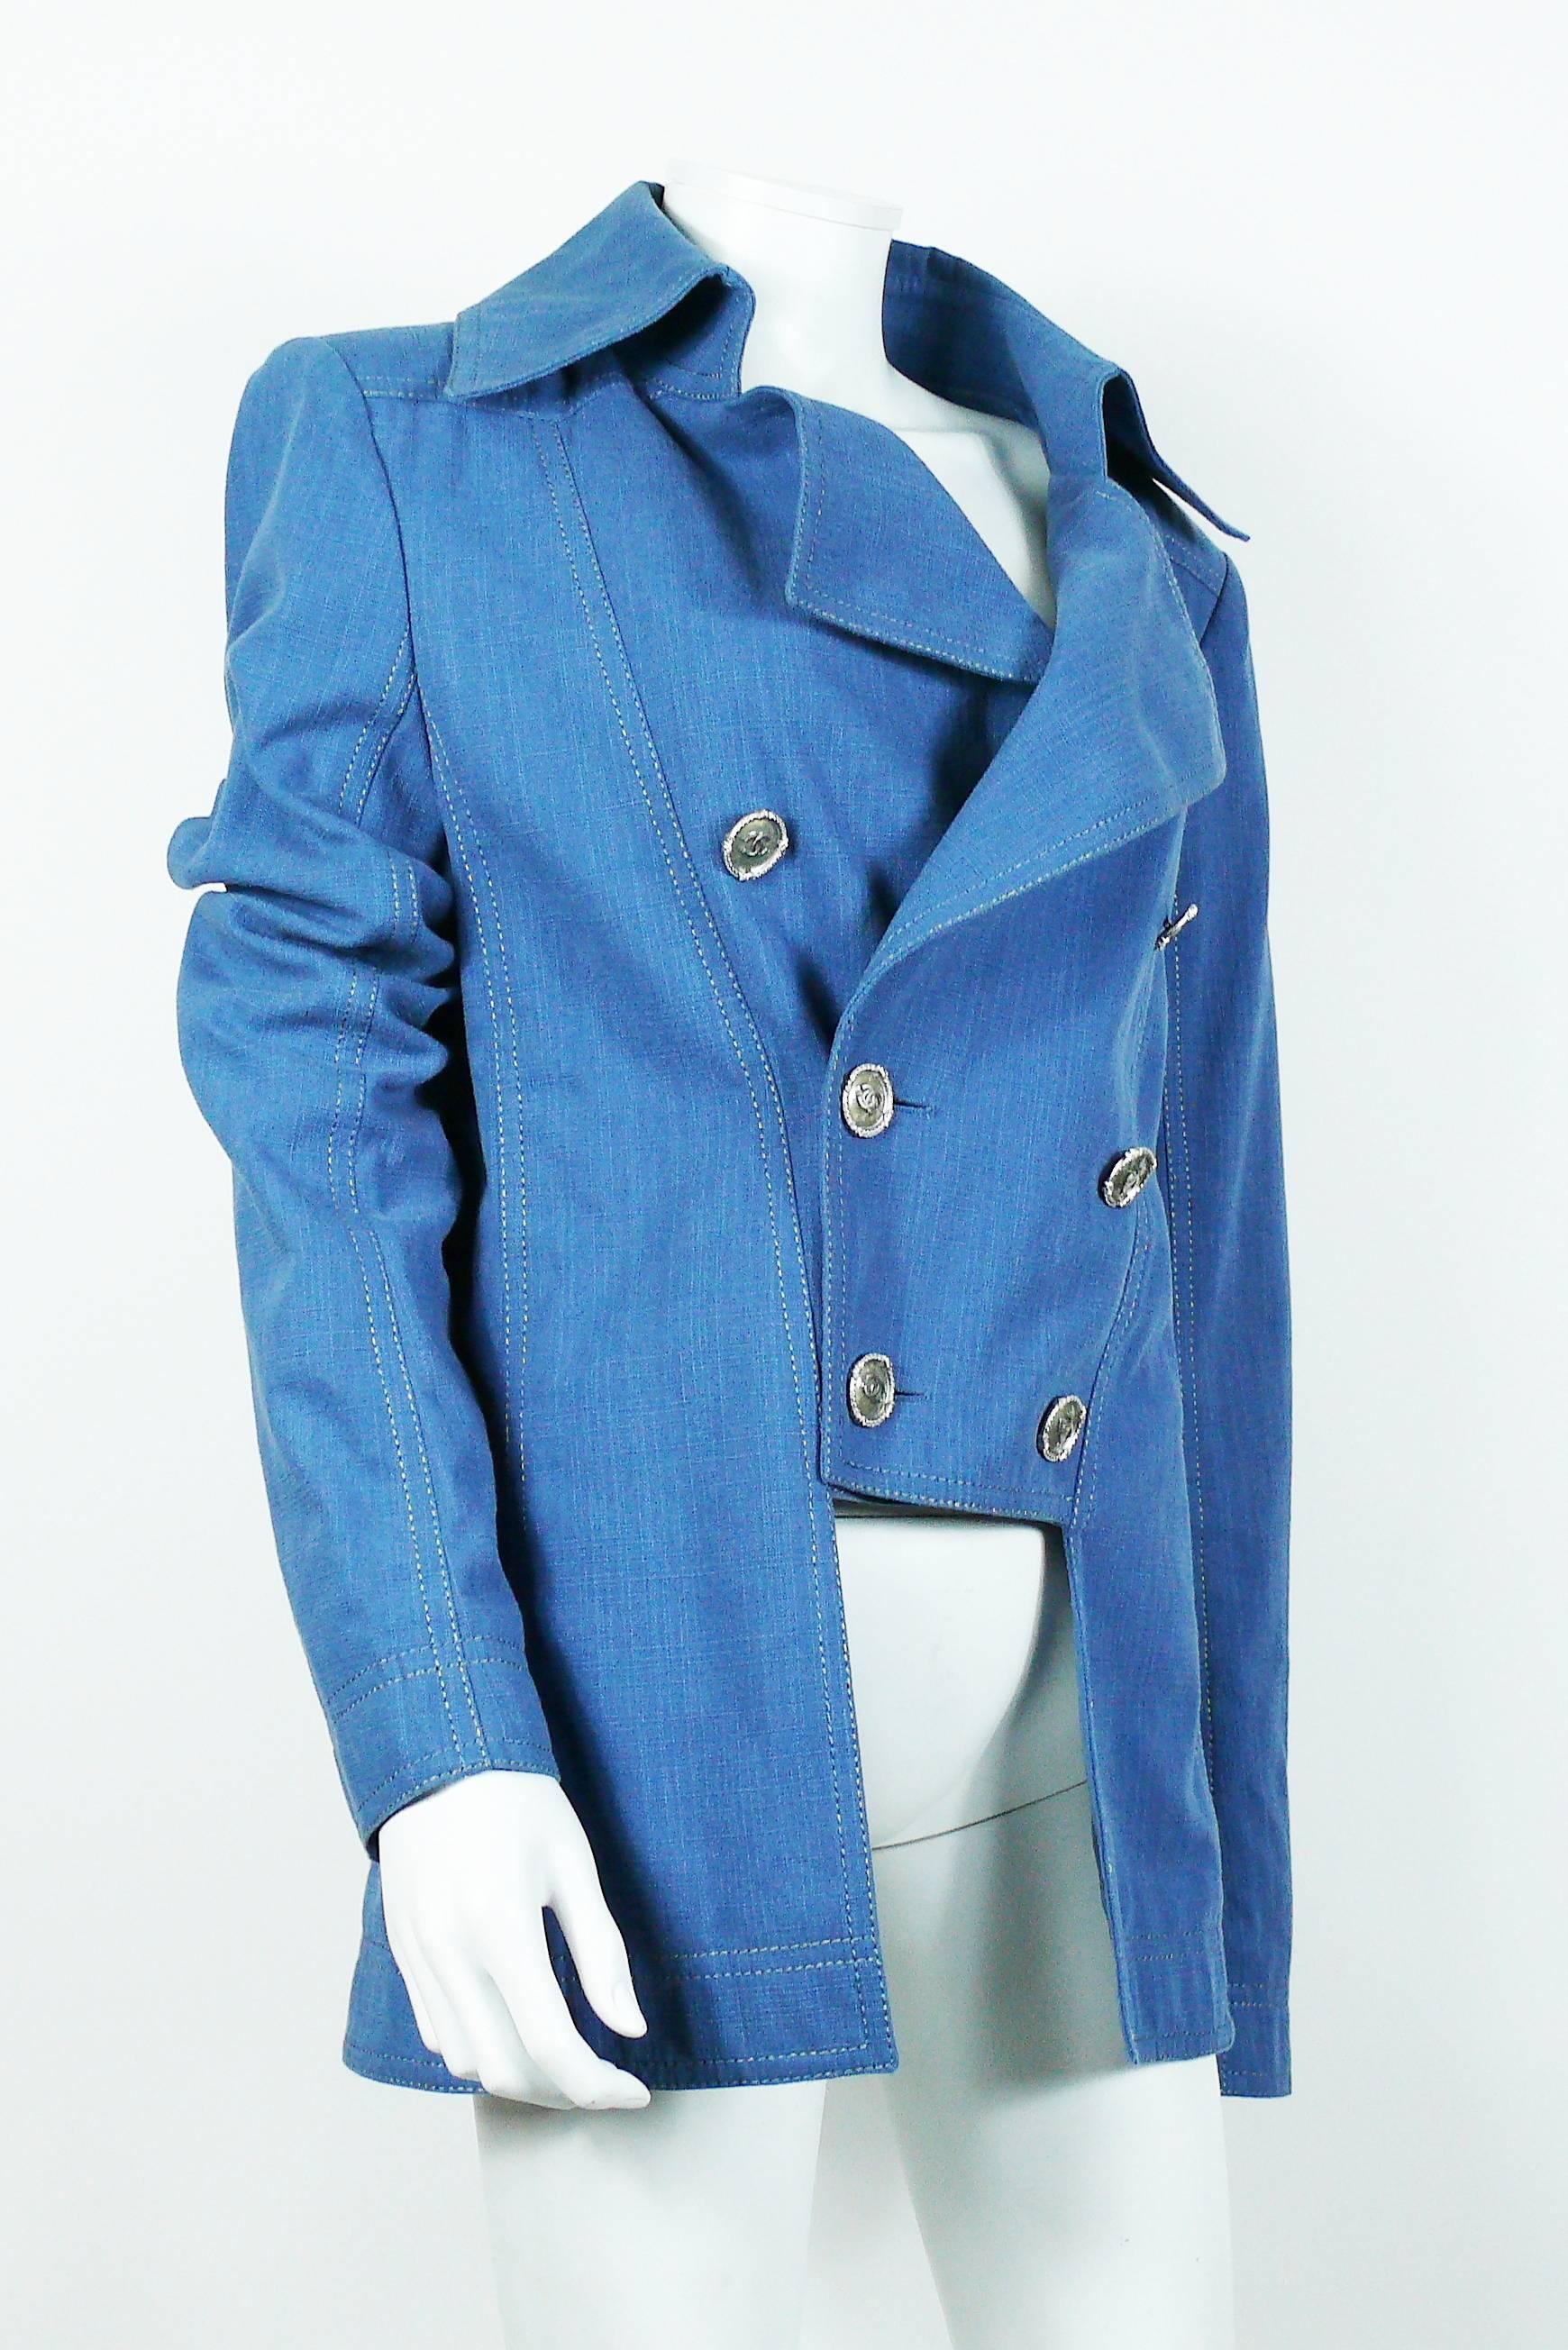 Blue Chanel Cruise Resort 2013 Collection Chambray Runway Jacket